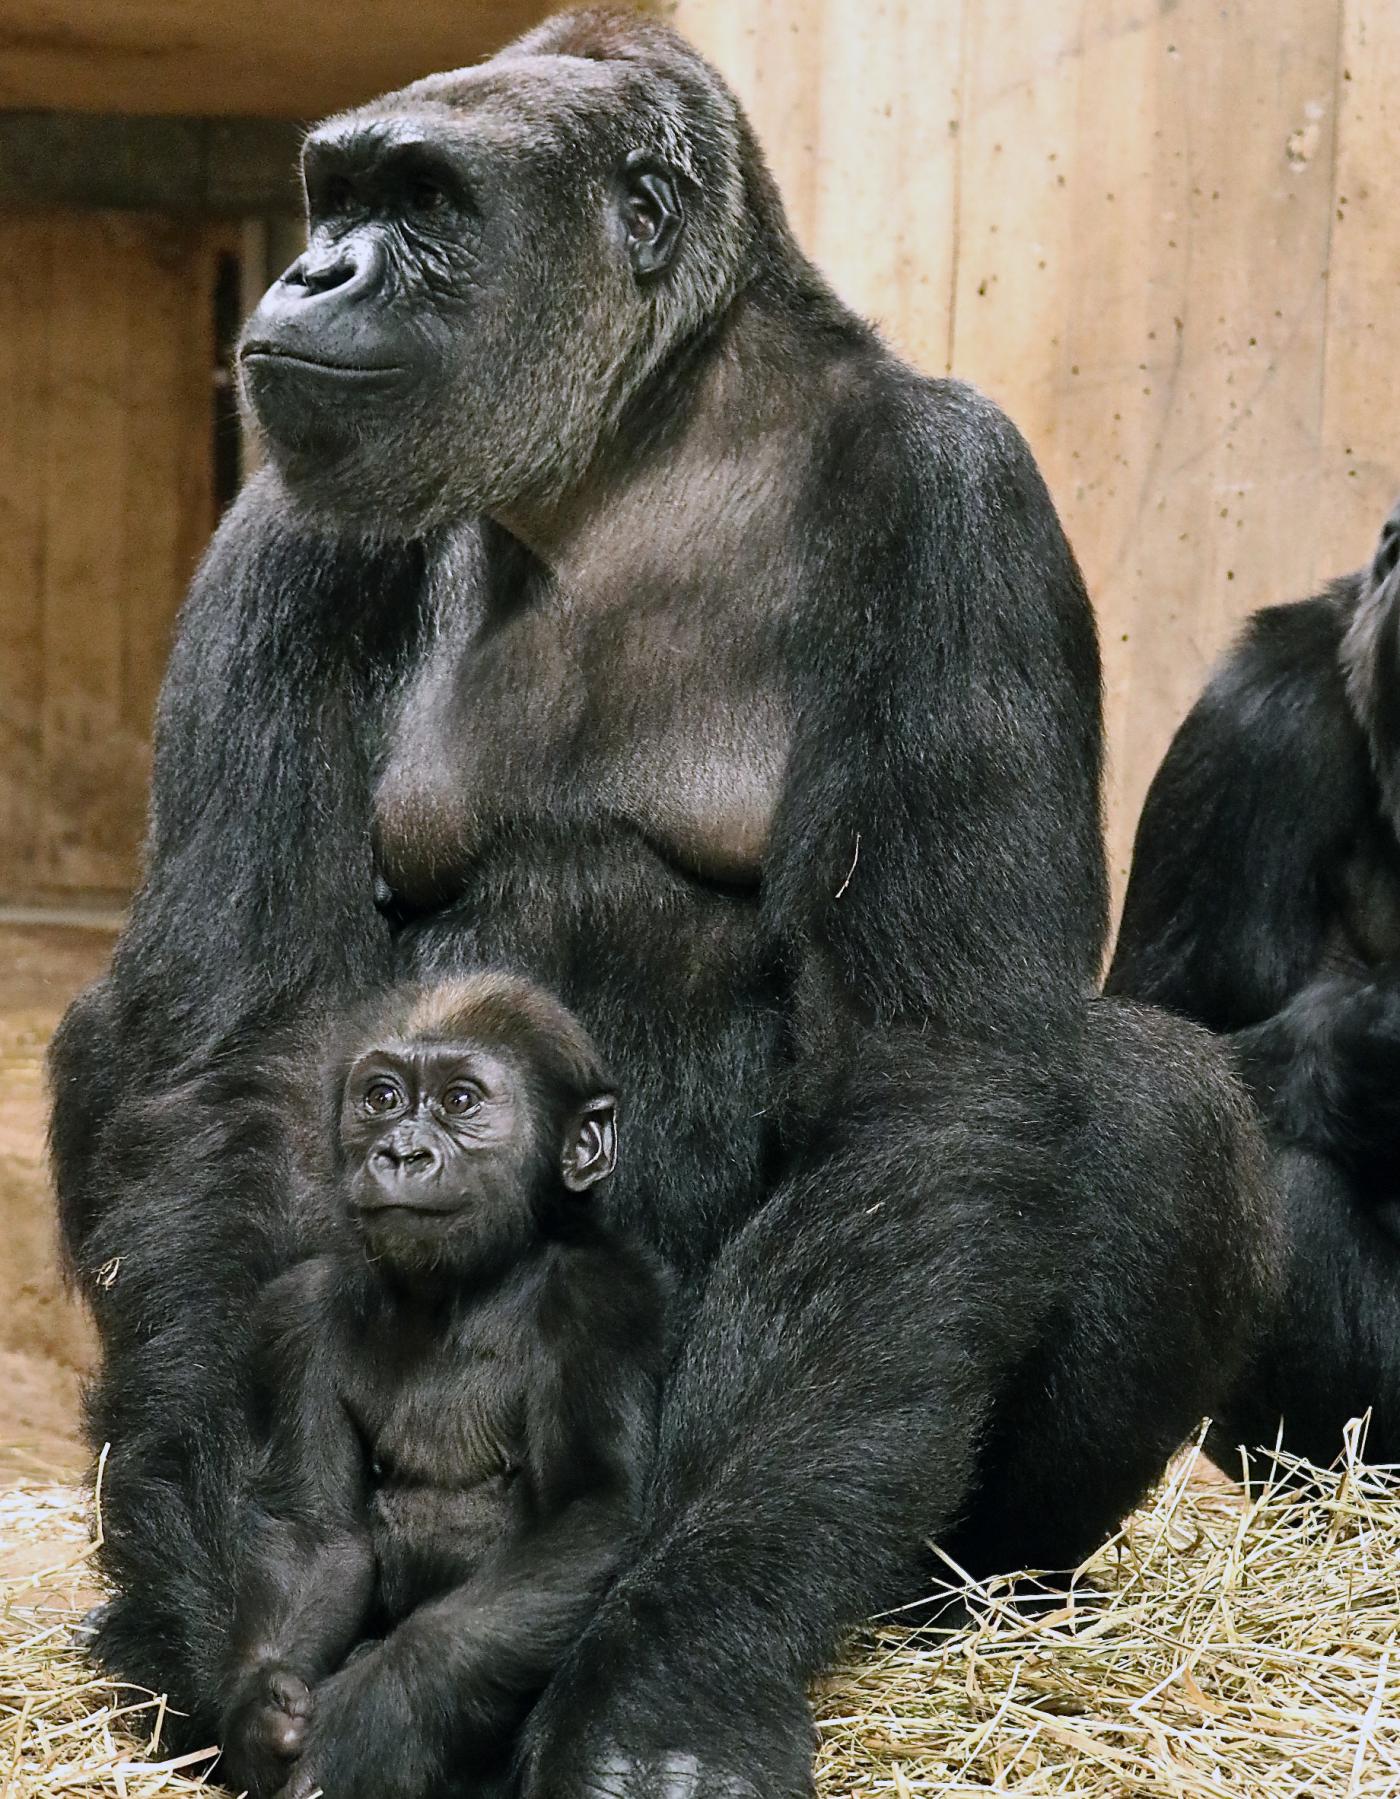 5-month-old western lowland gorilla Moke sits on his mother's lap